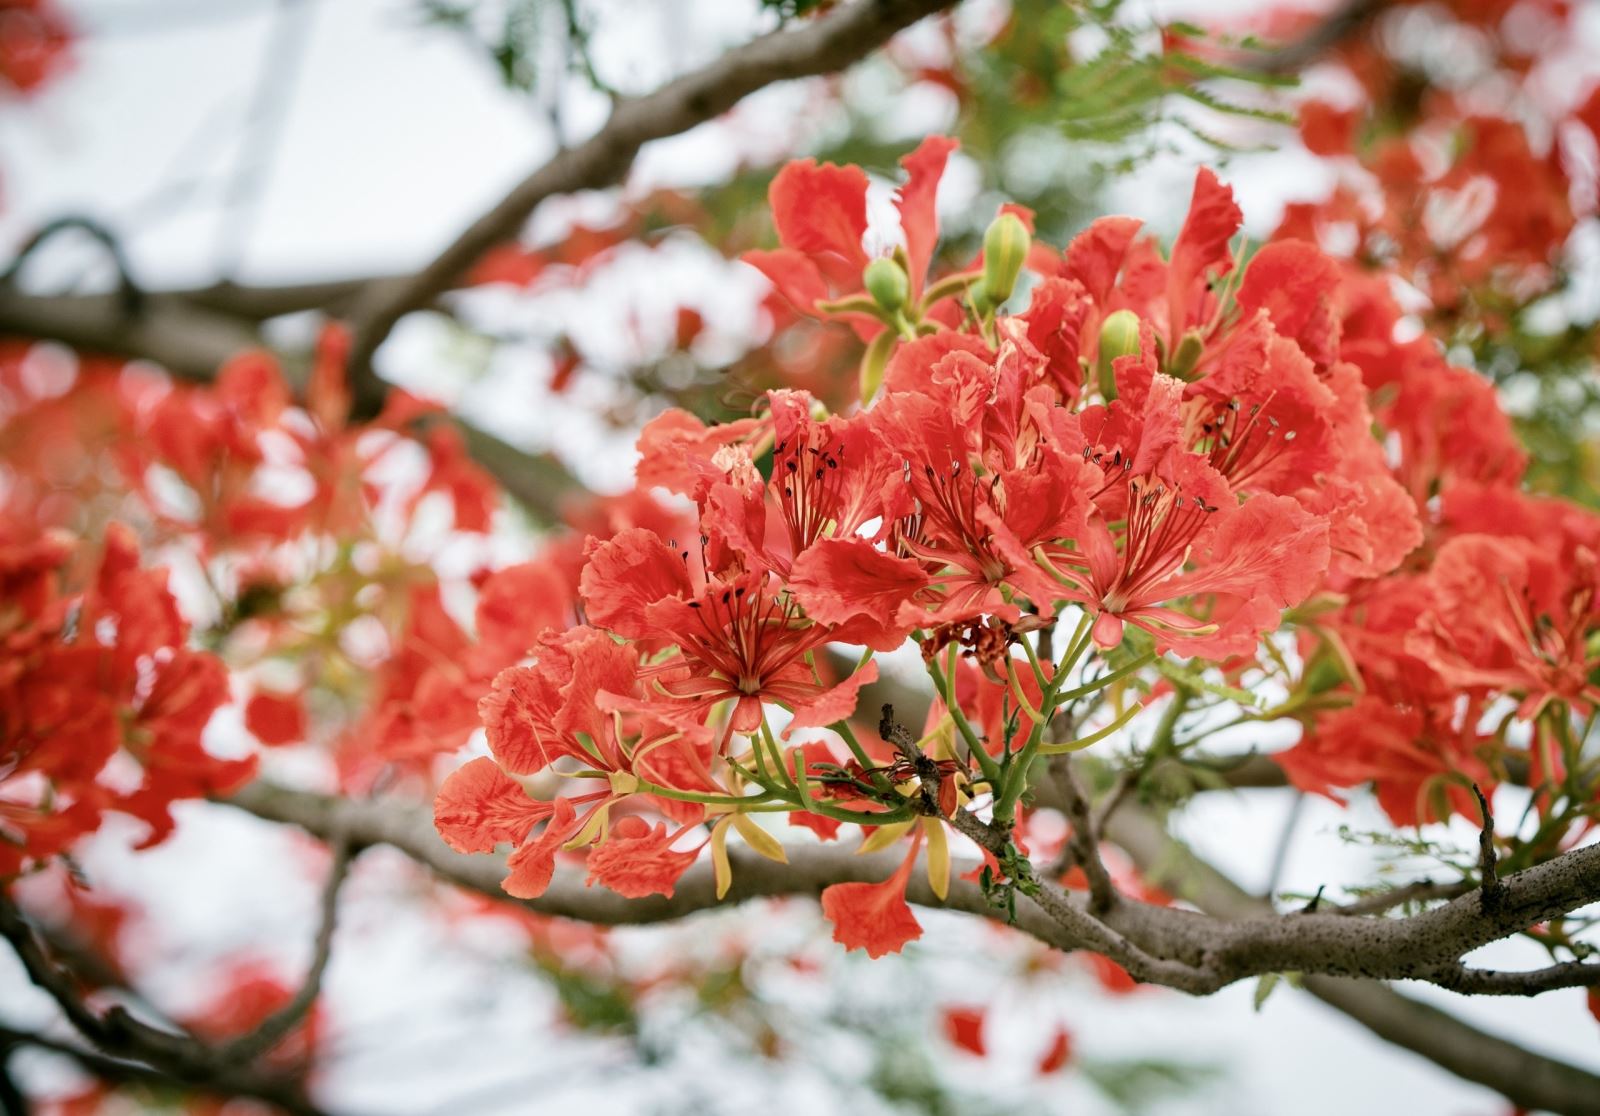 May - the blooming season of phoenix flowers in Phu Tho Province